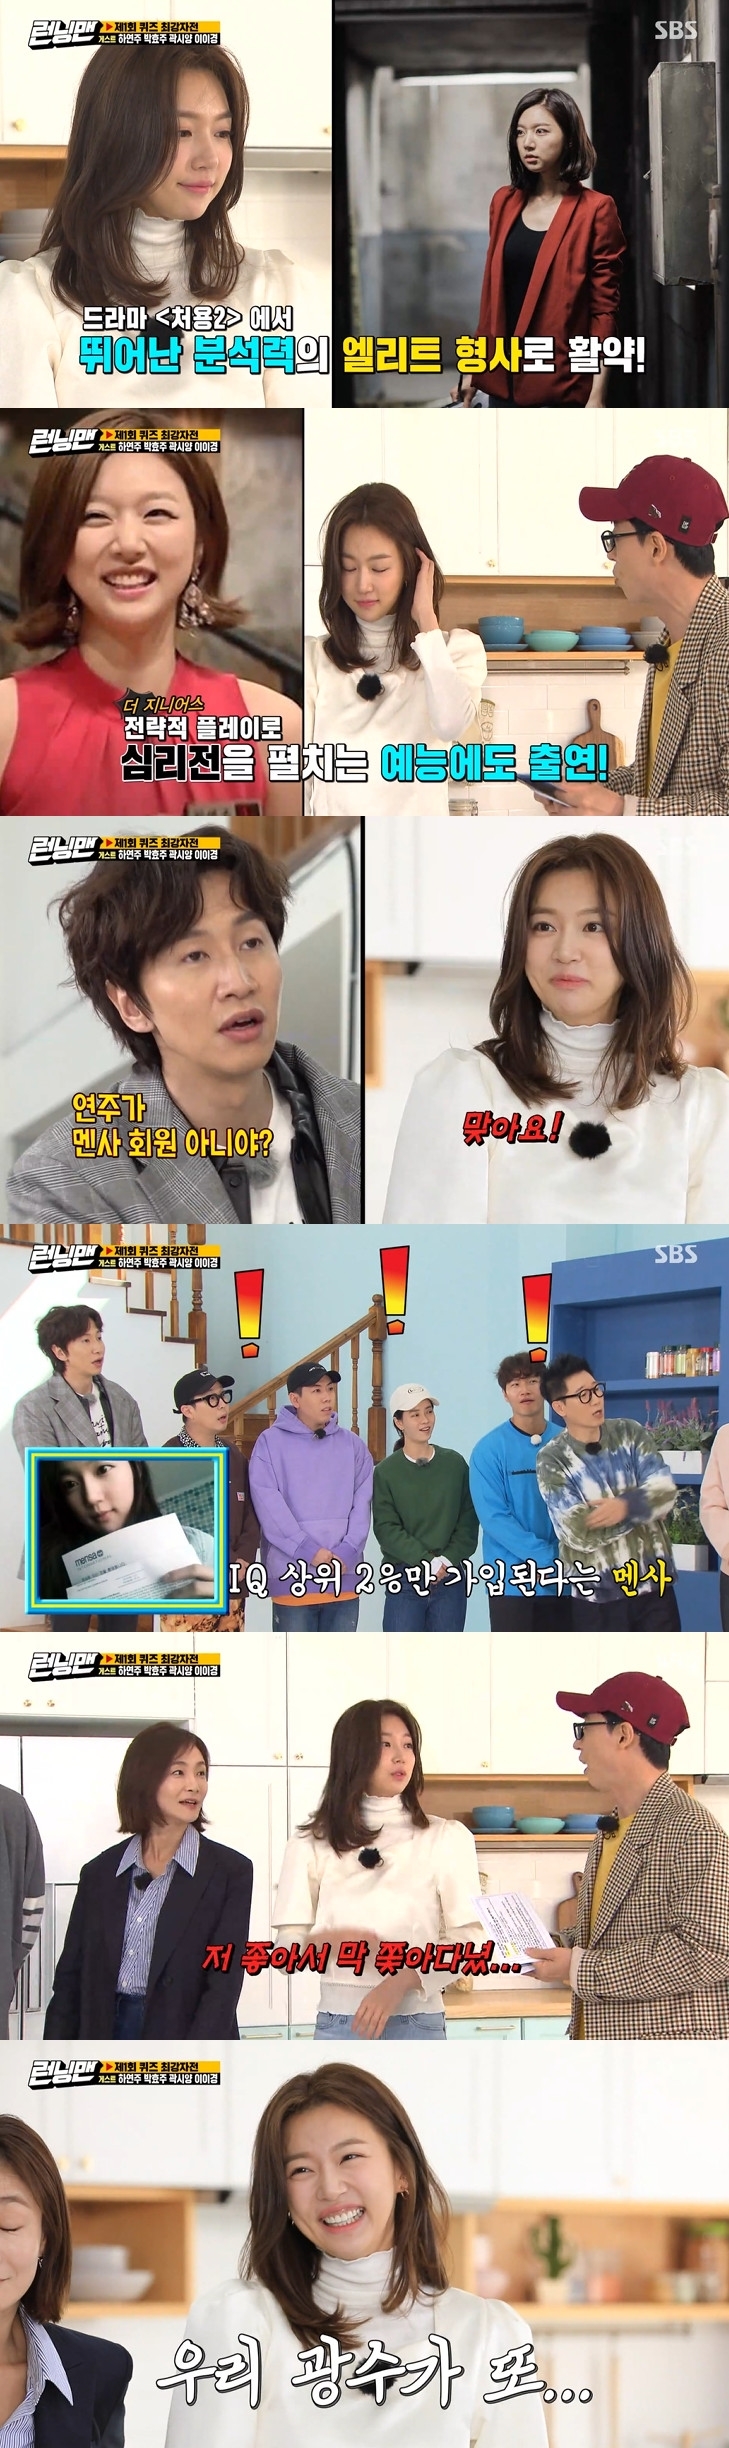 Actor Ha Yeon-joo played as Mensa GoddessSBS Running Man, which was broadcast on May 3, was decorated with the strongest quiz of the first quiz. Actors Kwak Si-yang, Lee Kyung, Ha Yeon-joo and Park Hyo-joo appeared as guests.Ha Yeon-joo has shown off his intense presence since his appearance.Ha Yeon-joo, who made his debut with MBC sitcom He Comes in 2008, KBS 2TV Ji Sung-myeon Gakcheon, MBC Miss Korea, SBS Its okay, Im Love, OCN Cheongyong Season 2 and MBC Goodbye Mr. Black156, also known for its Mensa Society One.Lee Kwang-soo asked Ha Yeon-joo during the recording, Is it Mensa? and Ha Yeon-joo replied, Thats right.I forgot how many 150 Im, Ji Suk-jin said when asked how many I.Q.s.The production team announced through the broadcast subtitle that Ha Yeon-joos I.Q. was 156.The extraordinary relationship between Ha Yeon-joo and Lee Kwang-soo was also revealed.The performance came with me in the sitcom where I debuted, said Lee Kwang-soo, who co-starred in Hes Coming 12 years ago.I like it, so Im just chasing after Dani Alves, Ha Yeon-joo recalled, while Lee Kwang-soo explained, it wasnt real, it was the role.In the next quiz showdown, Ha Yeon-joo was surprised to find that he speaks four languages, including Korean, English, Chinese and ancient Greek.Kim Jong-guk and Lee Kwang-soo expressed surprise, saying, Why do you learn that girl (an ancient Greek)?Among them, Ji Suk-jin asked, What is thank you in Ancient Greek? Ha Yeon-joo replied, I dont know if Im thank you in Ancient Greek.I know ancient Greek that is very funny, but I can not remember it, he added.Yoo Jae-Suk, who felt puzzled by Ha Yeon-joos ancient Greek skills, asked, So what is thank you in English?I have not yet raised doubts about Ha Yeon-joo in Ancient Greek, he added, adding to the laugh.hwang hye-jin